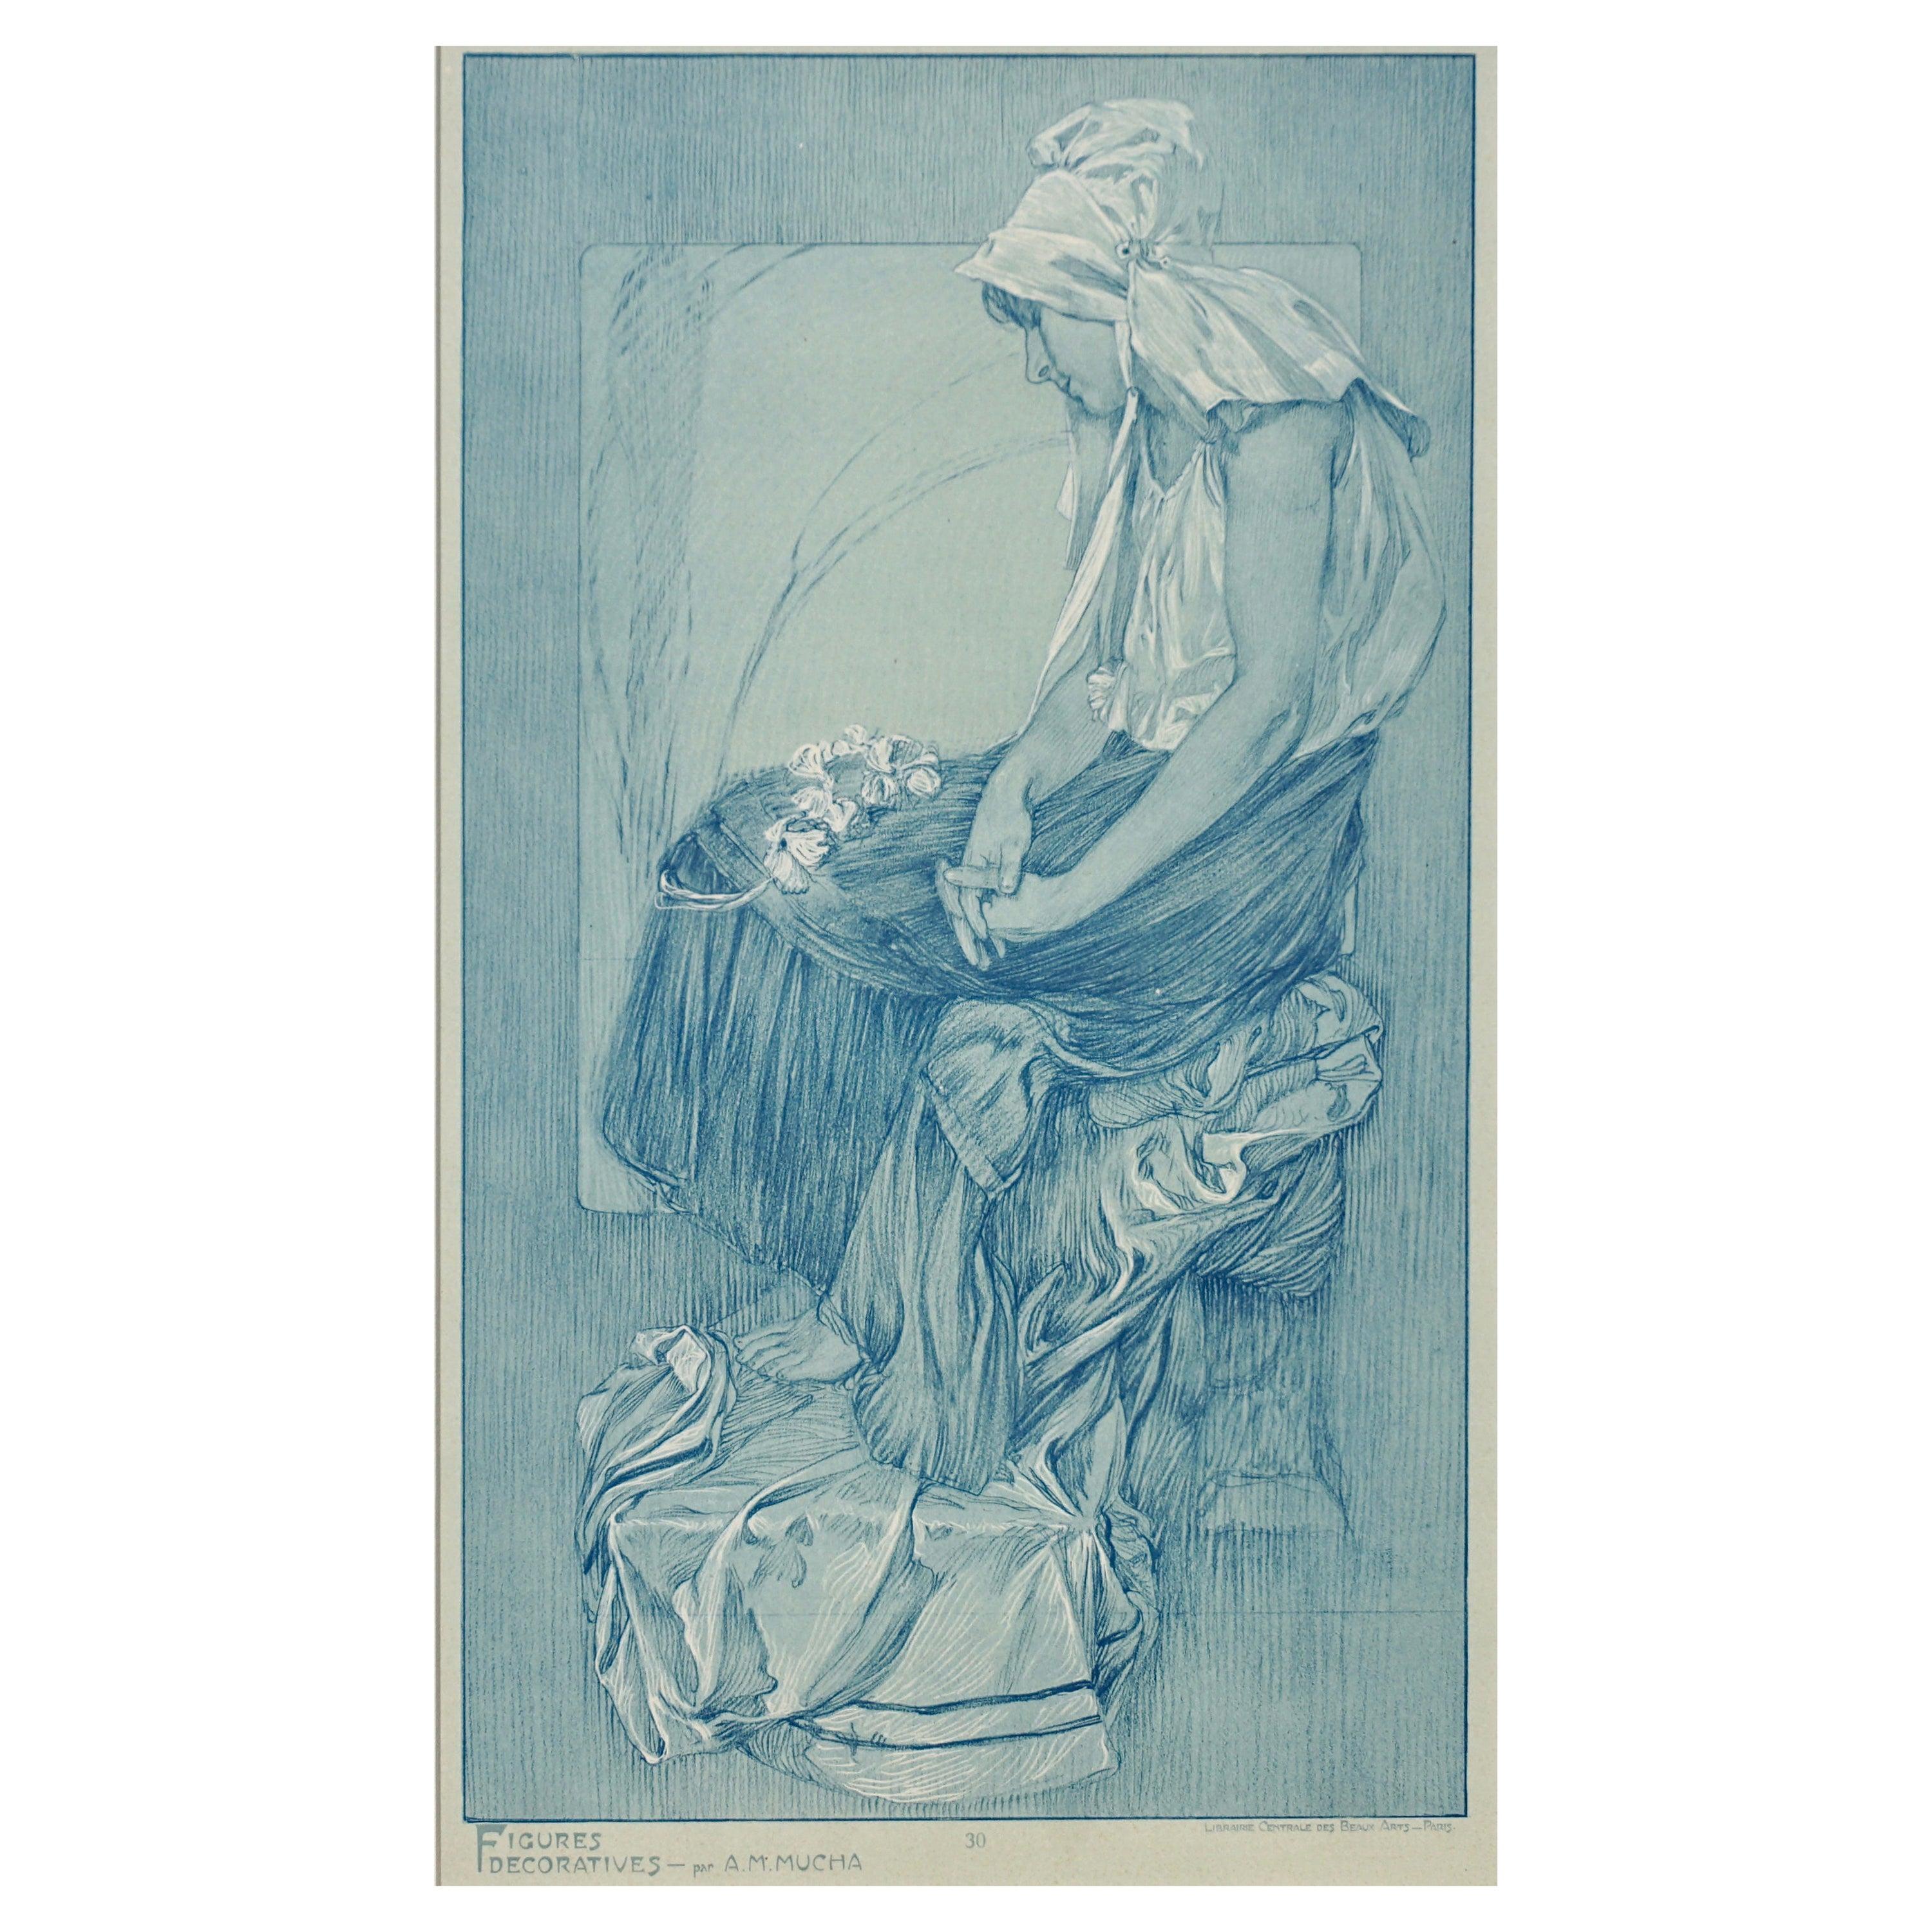 A framed Art Nouveau lithograph collotype poster by Alphone Mucha from 1905 representing the artist’s sketches of nudes, women and beautiful ladies in blues and white pigments on vellum paper. Plate 30 of “Figures Decoratives par A. M. Mucha,”